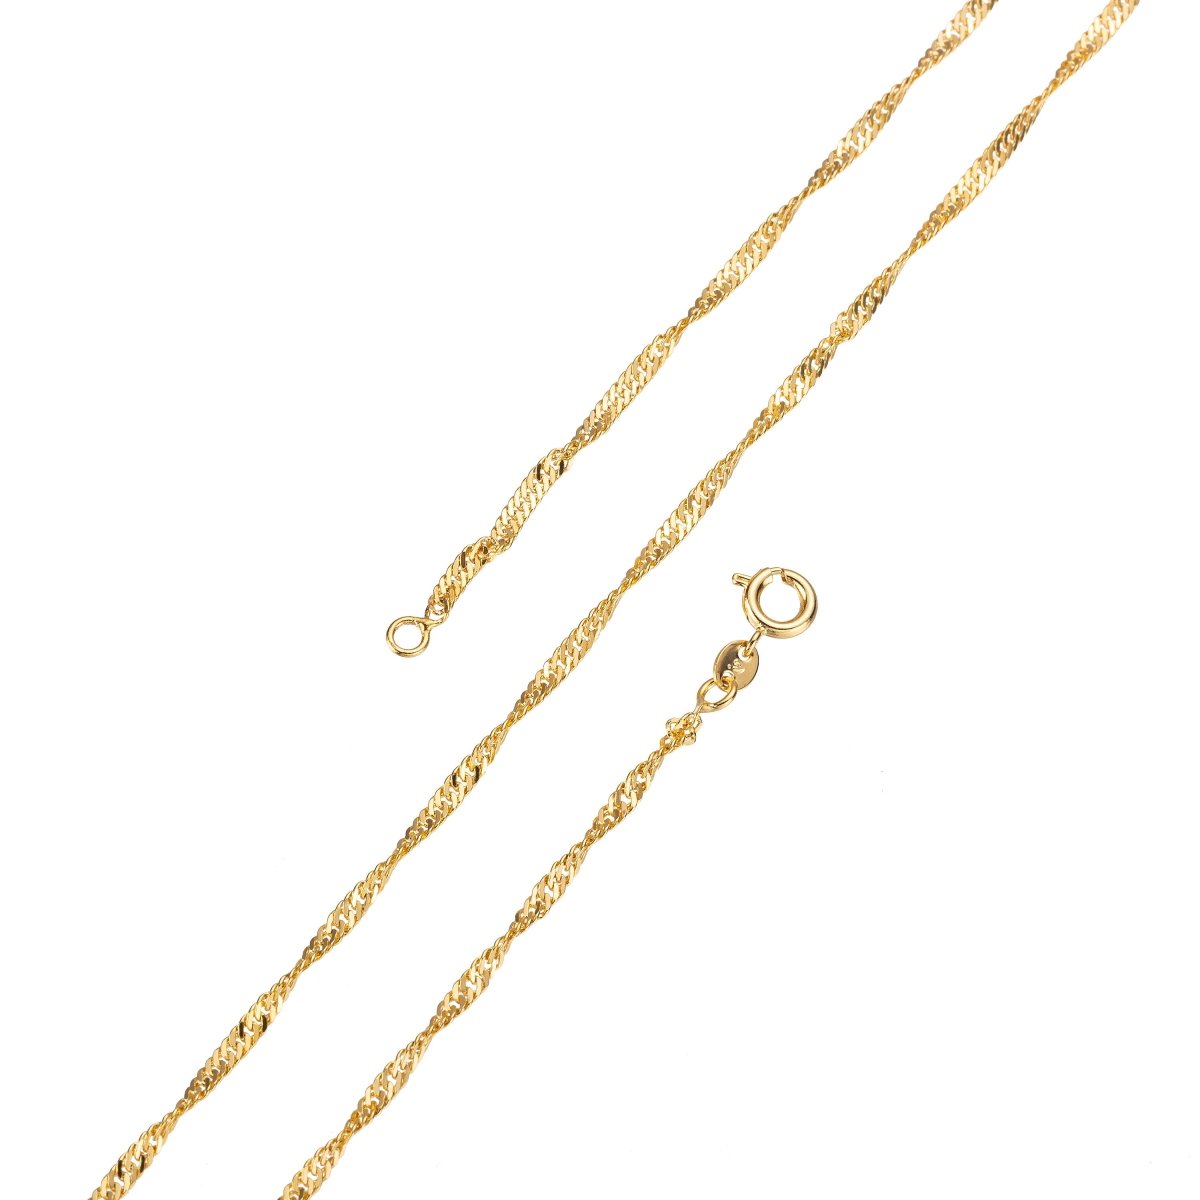 24K Gold Filled Necklace - Singapore Necklace - Dainty Gold Twist Link Chain Layering Necklace 2mm 17.5 Inch Ready To Wear w/ Spring Ring | CN-210 Clearance Pricing - DLUXCA